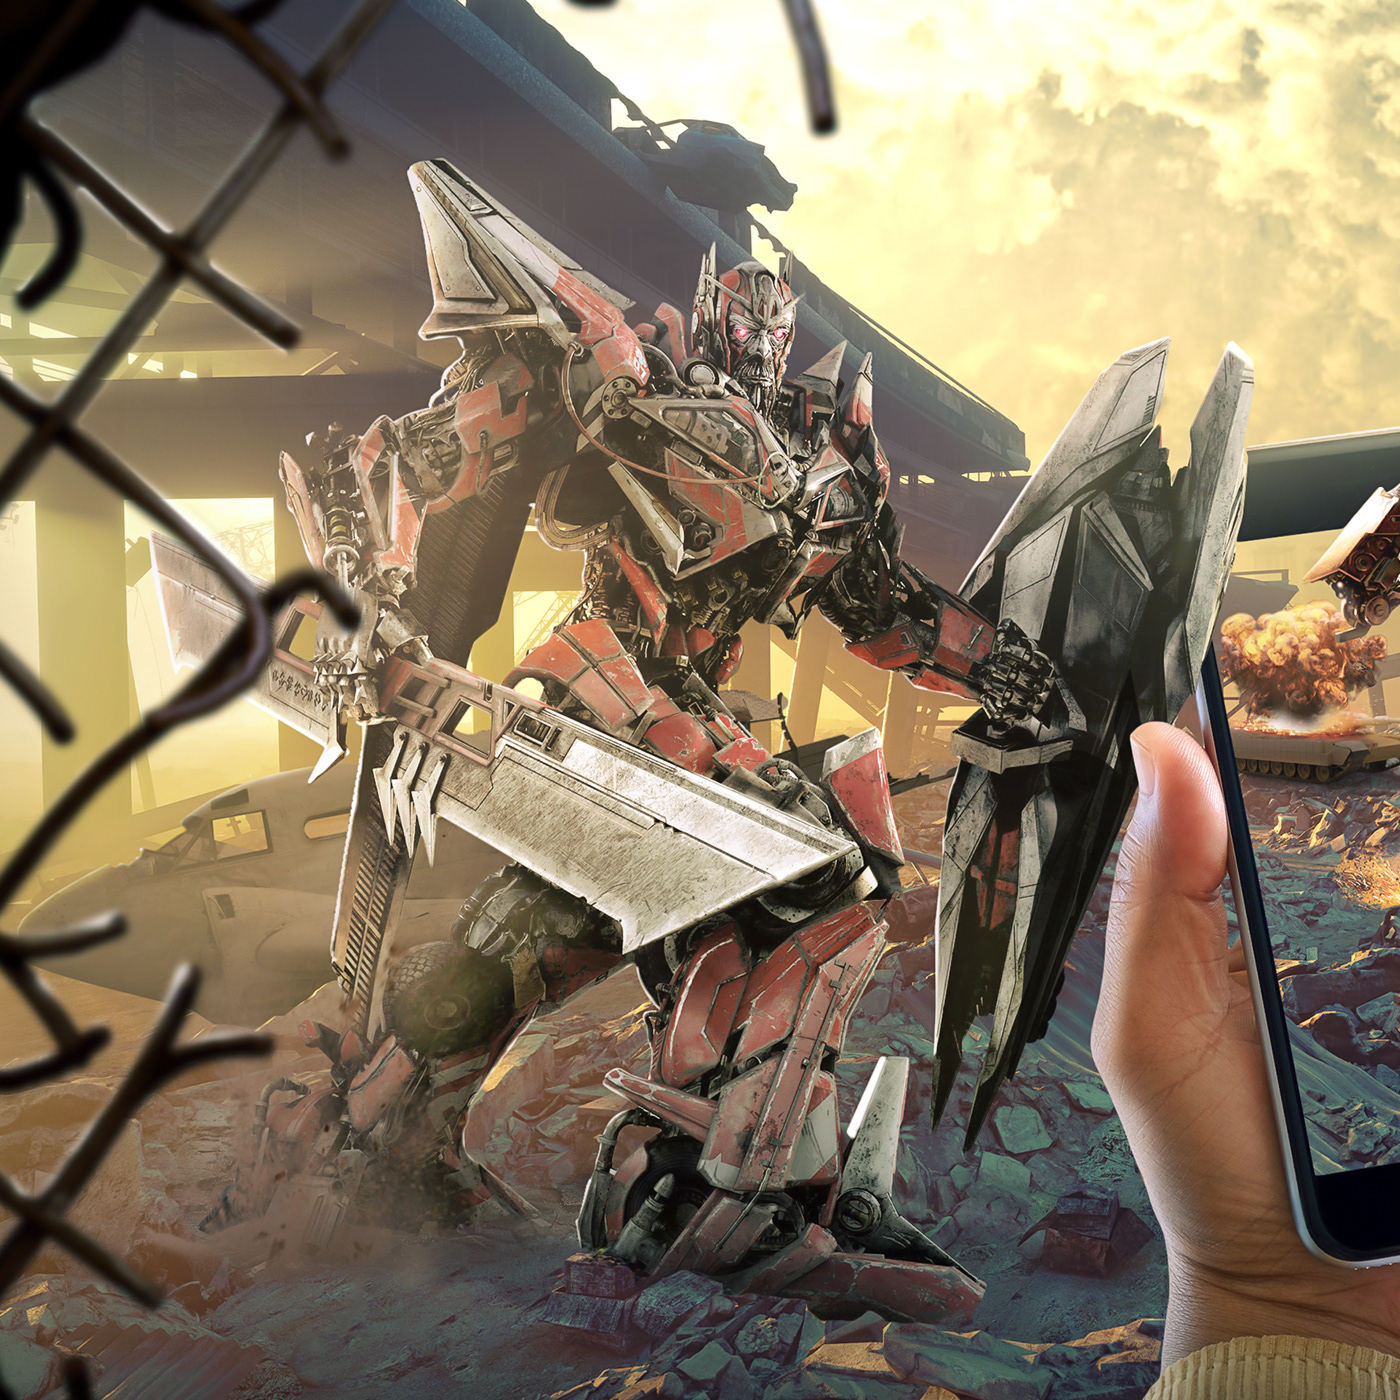 mobile action Printing ads fire Transformers adobe photoshop wacom